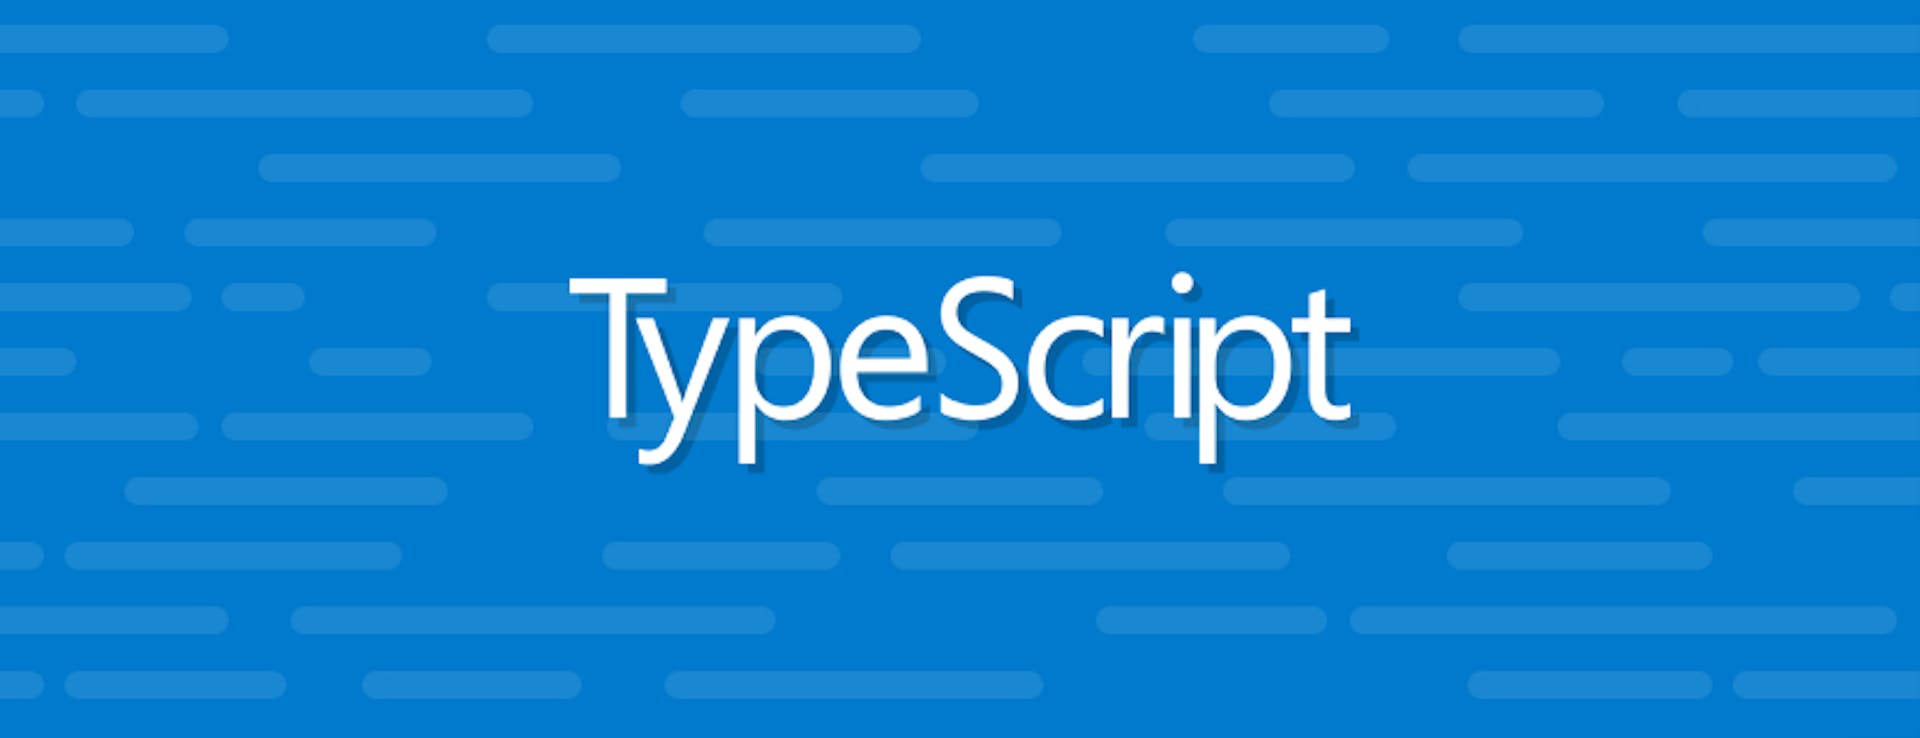 featured image - Typescript 3.9: What got changed?